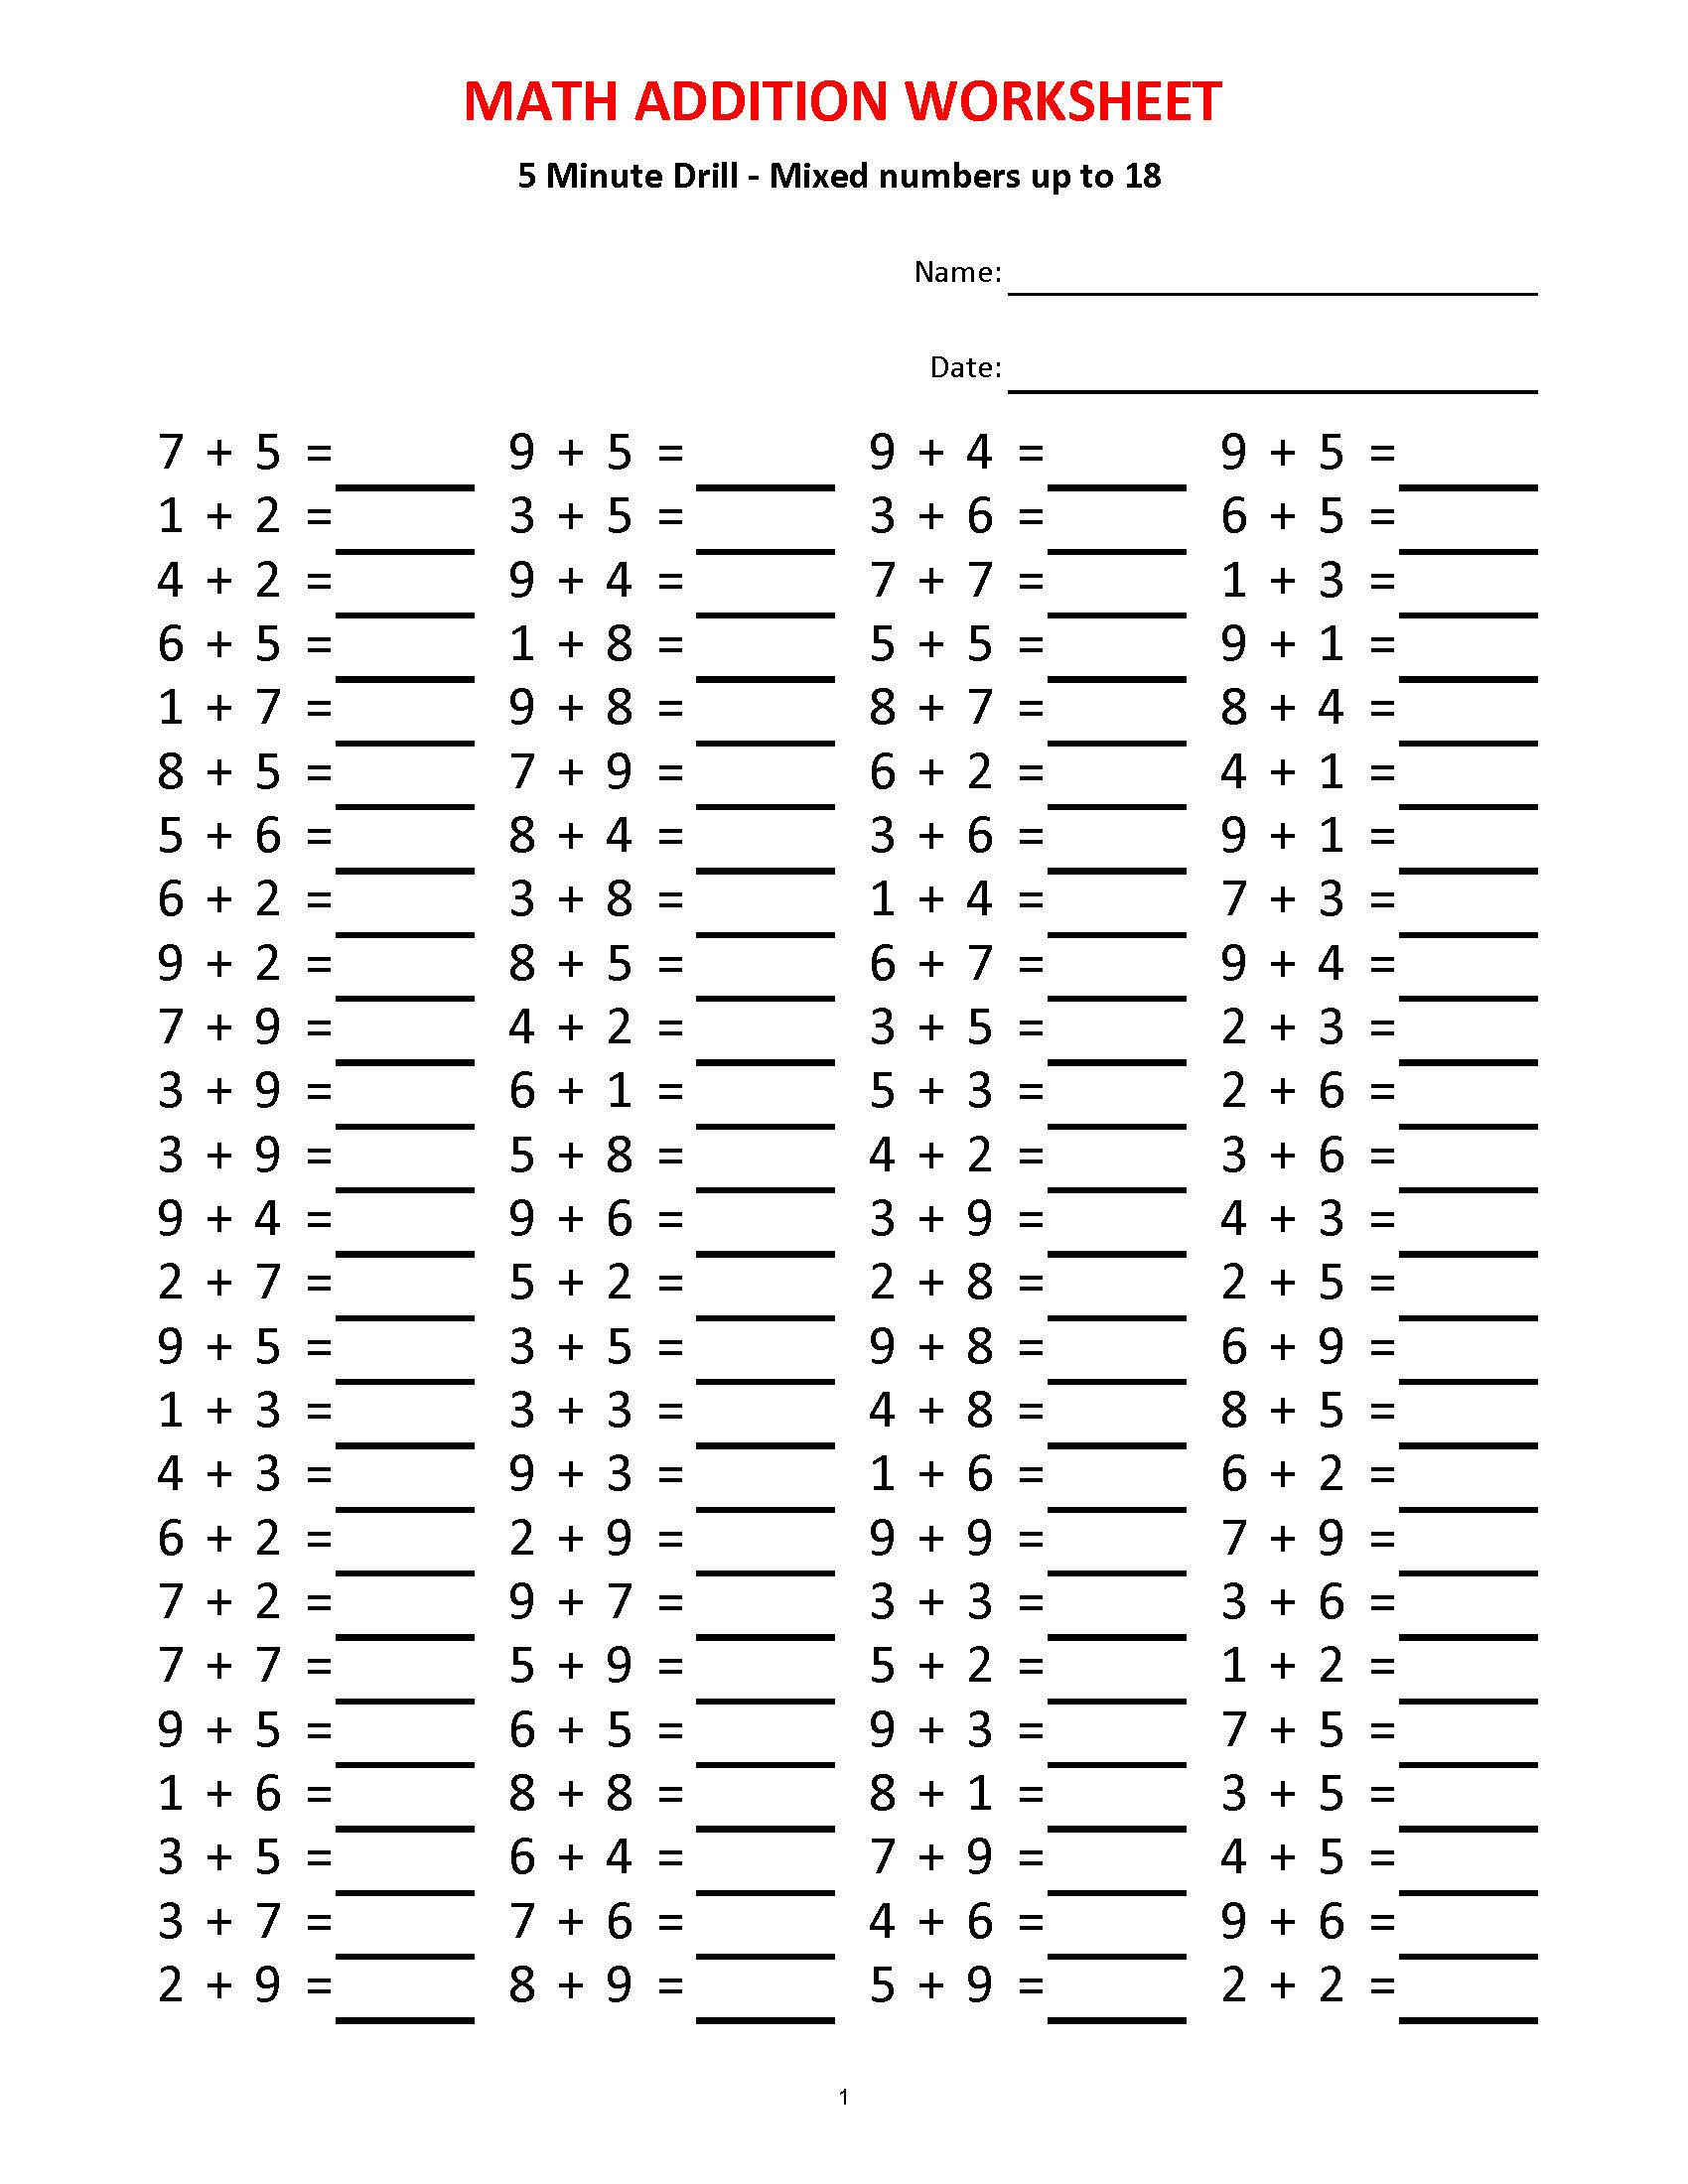 Addition 5 Minute Drill H 10 Math Worksheets With | Etsy within Multiplication Worksheets 5 Minute Drills